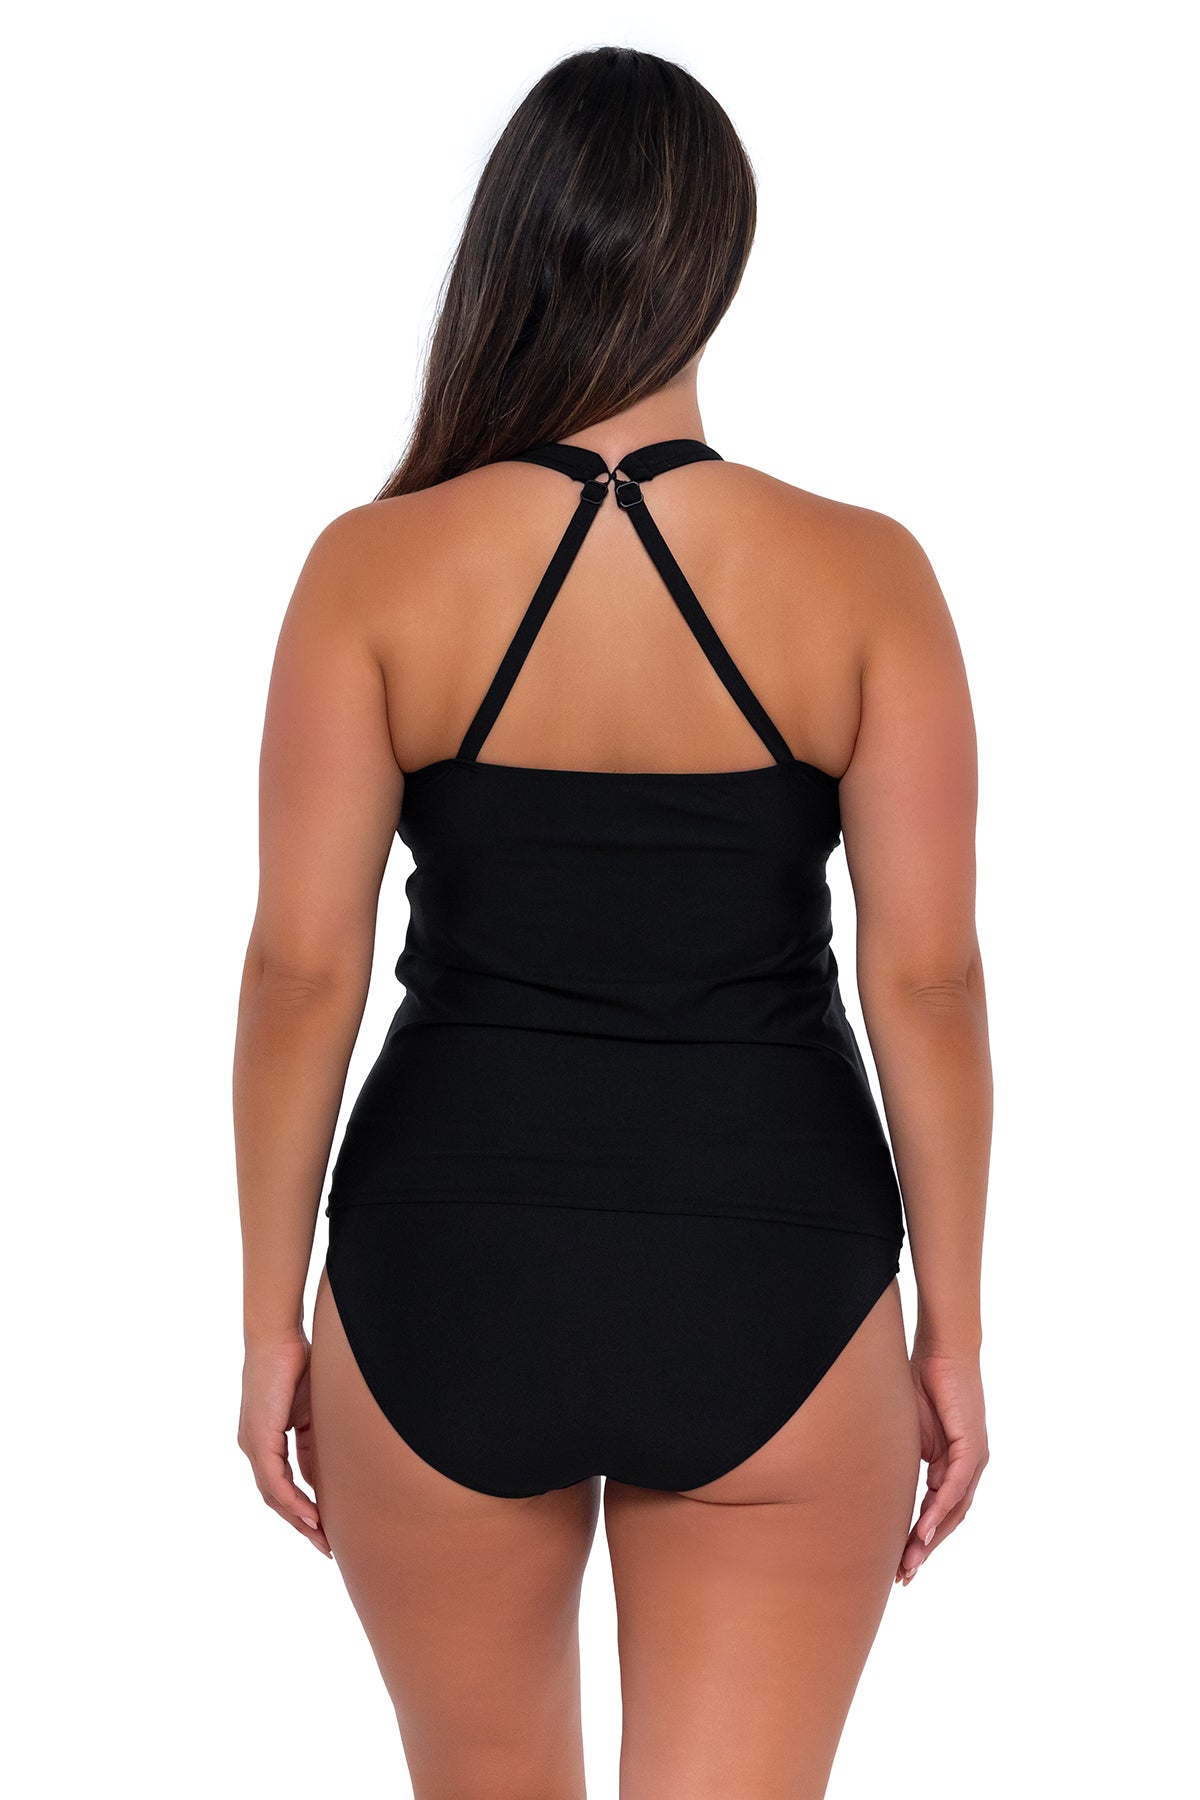 Back pose #1 of Nicky wearing Sunsets Escape Black Emerson Tankini Top showing crossback straps with matching Hannah High Waist bikini bottom